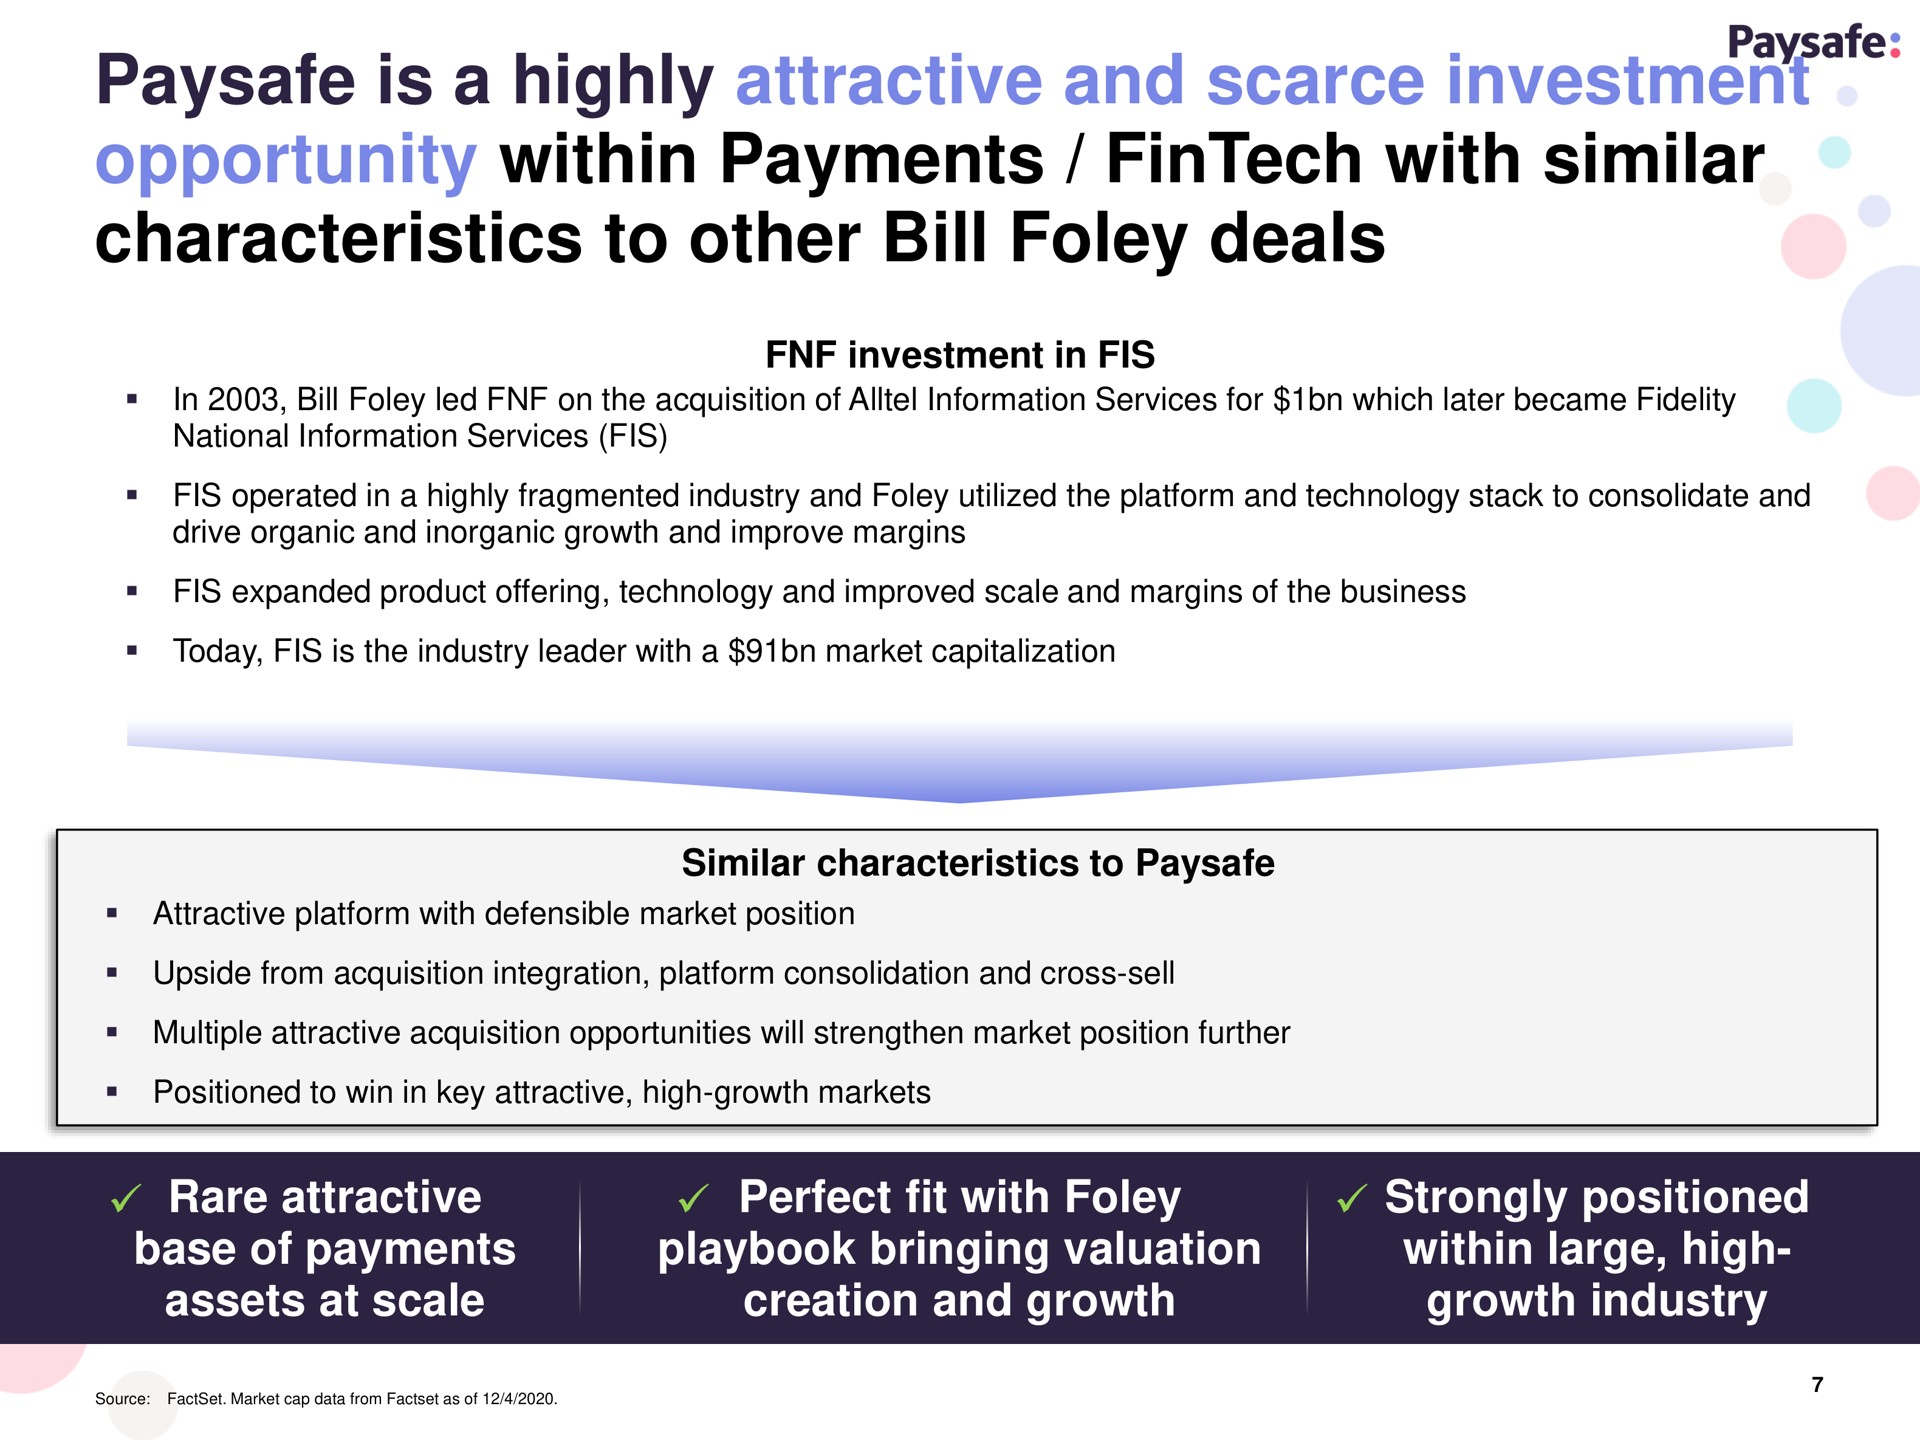 is a highly attractive and scarce investment opportunity within payments with similar characteristics to other bill deals | Paysafe